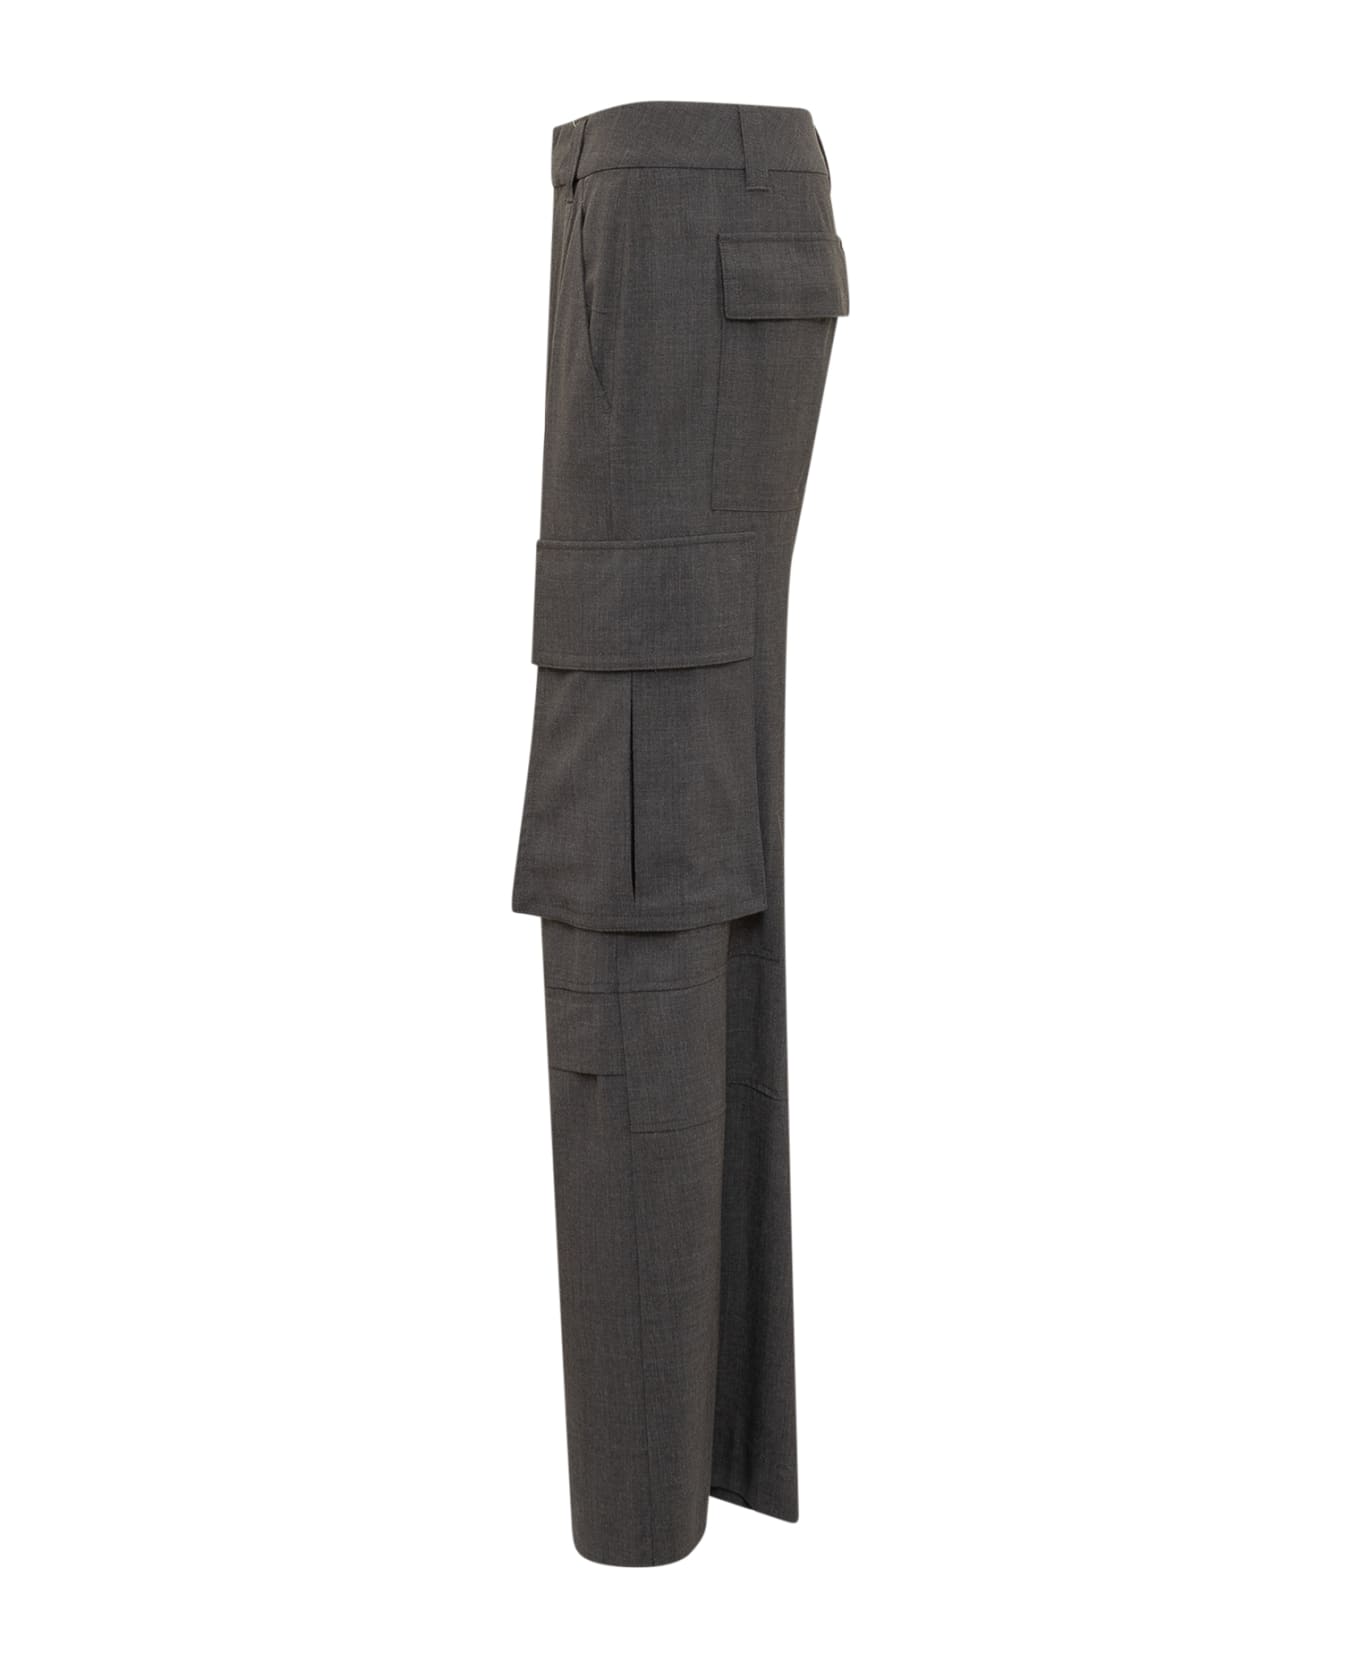 The Seafarer Police Trousers - 7091